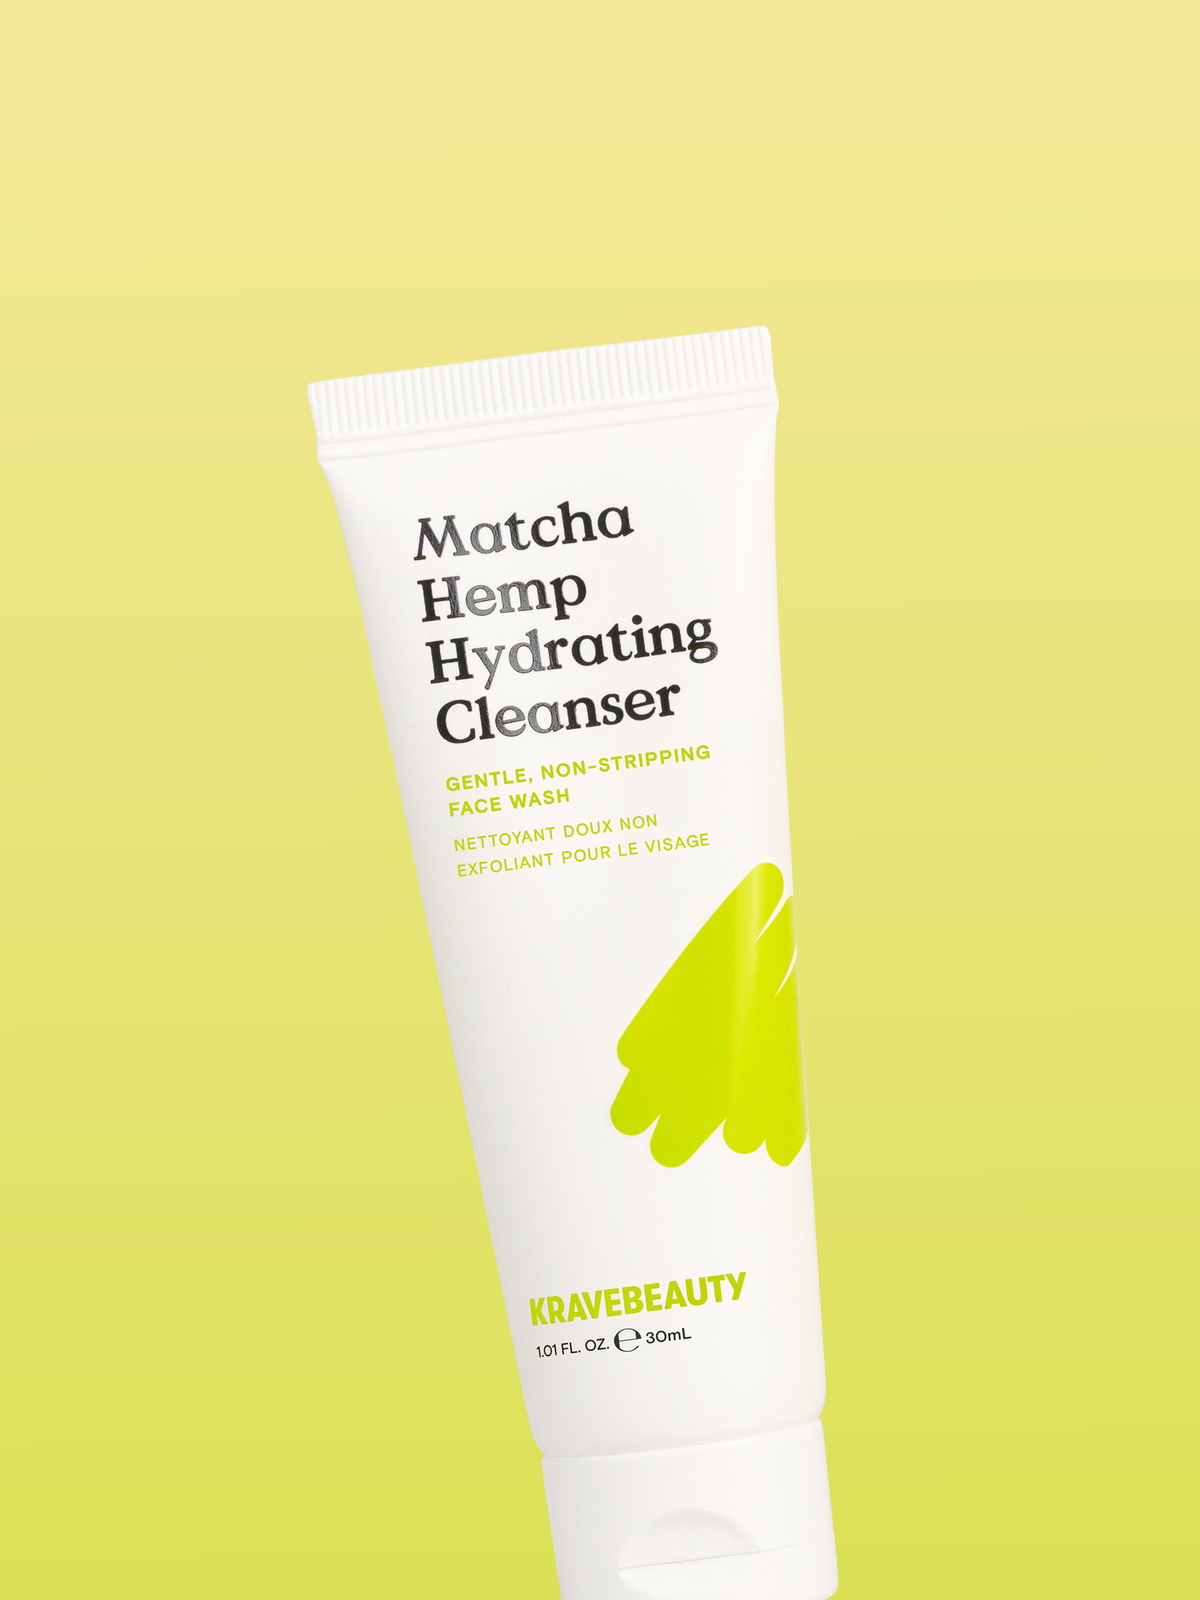 Mini Matcha Hemp Hydrating Cleanser gentle, non-stripping face wash is animal test free and vegan #size_1.01 oz / 30 ml